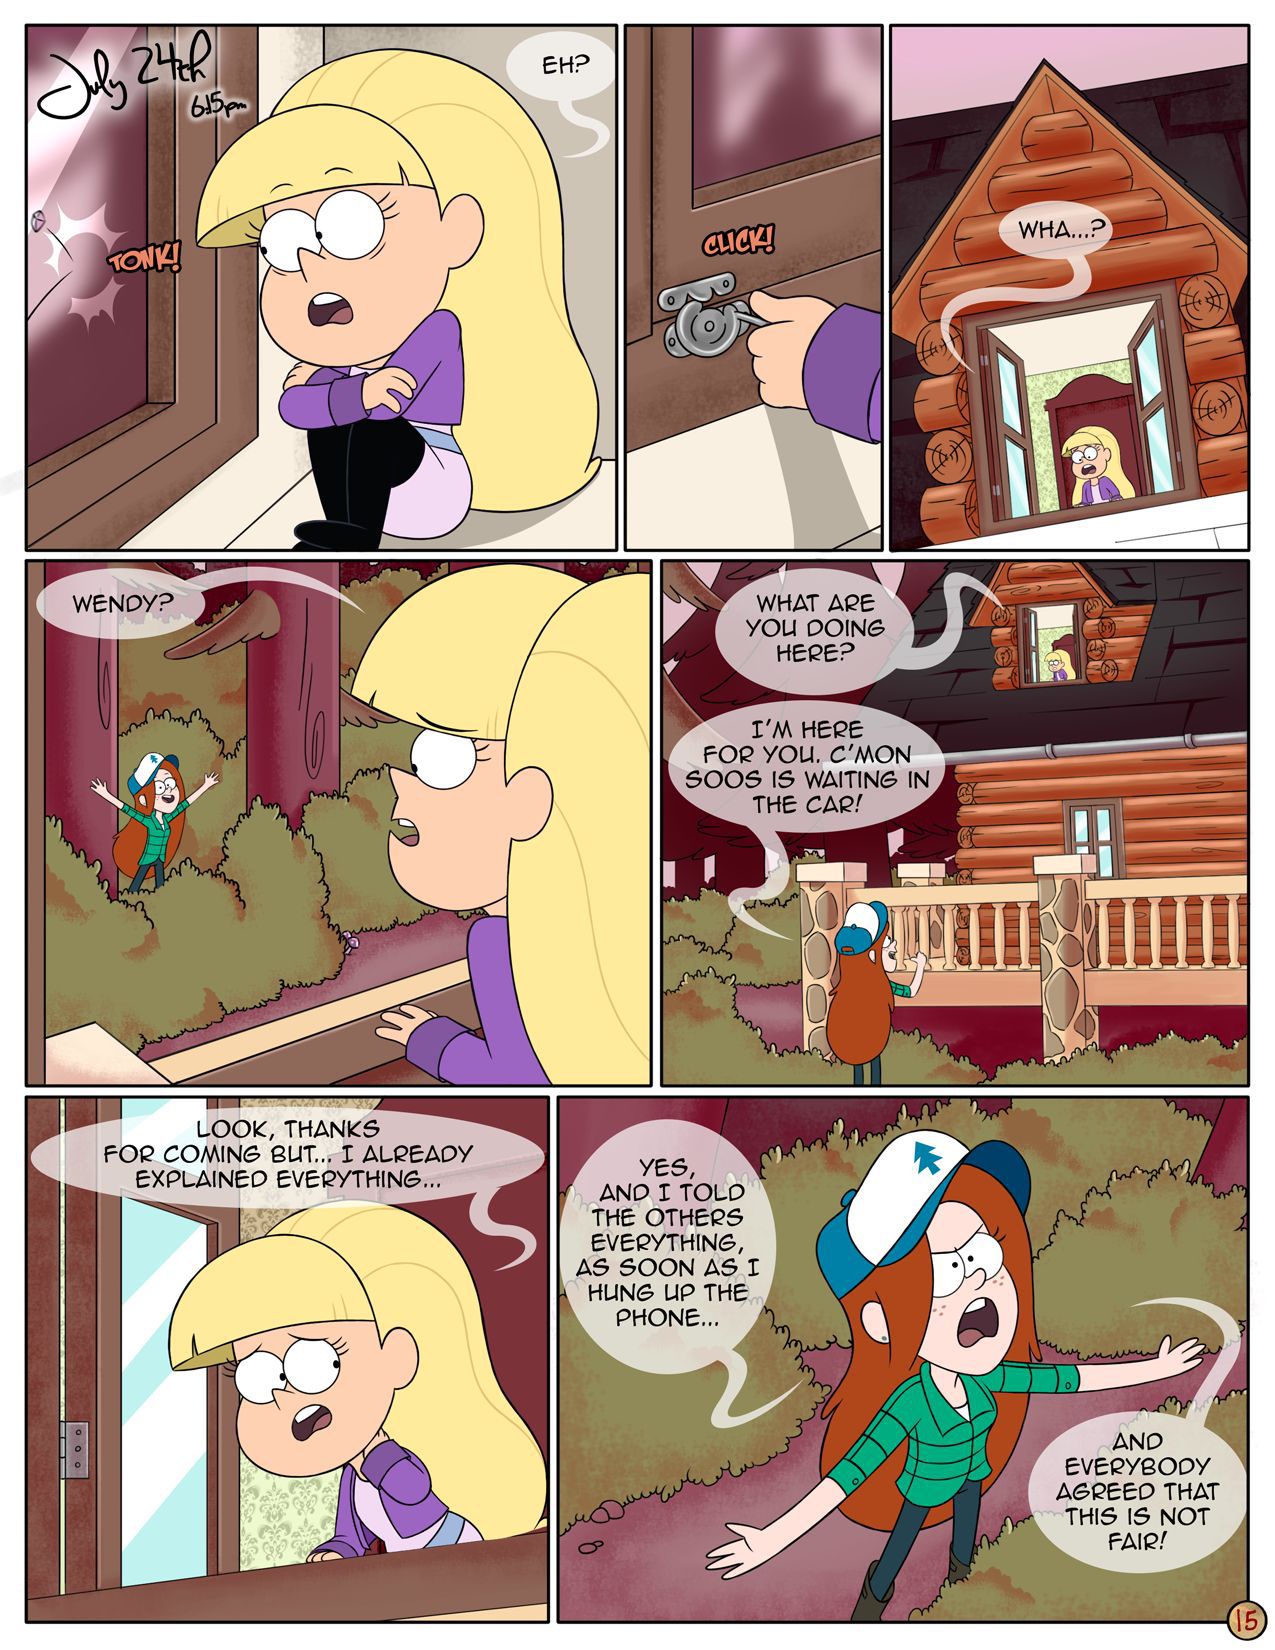 [Area] Next Summer (Gravity Falls) [Ongoing] 16